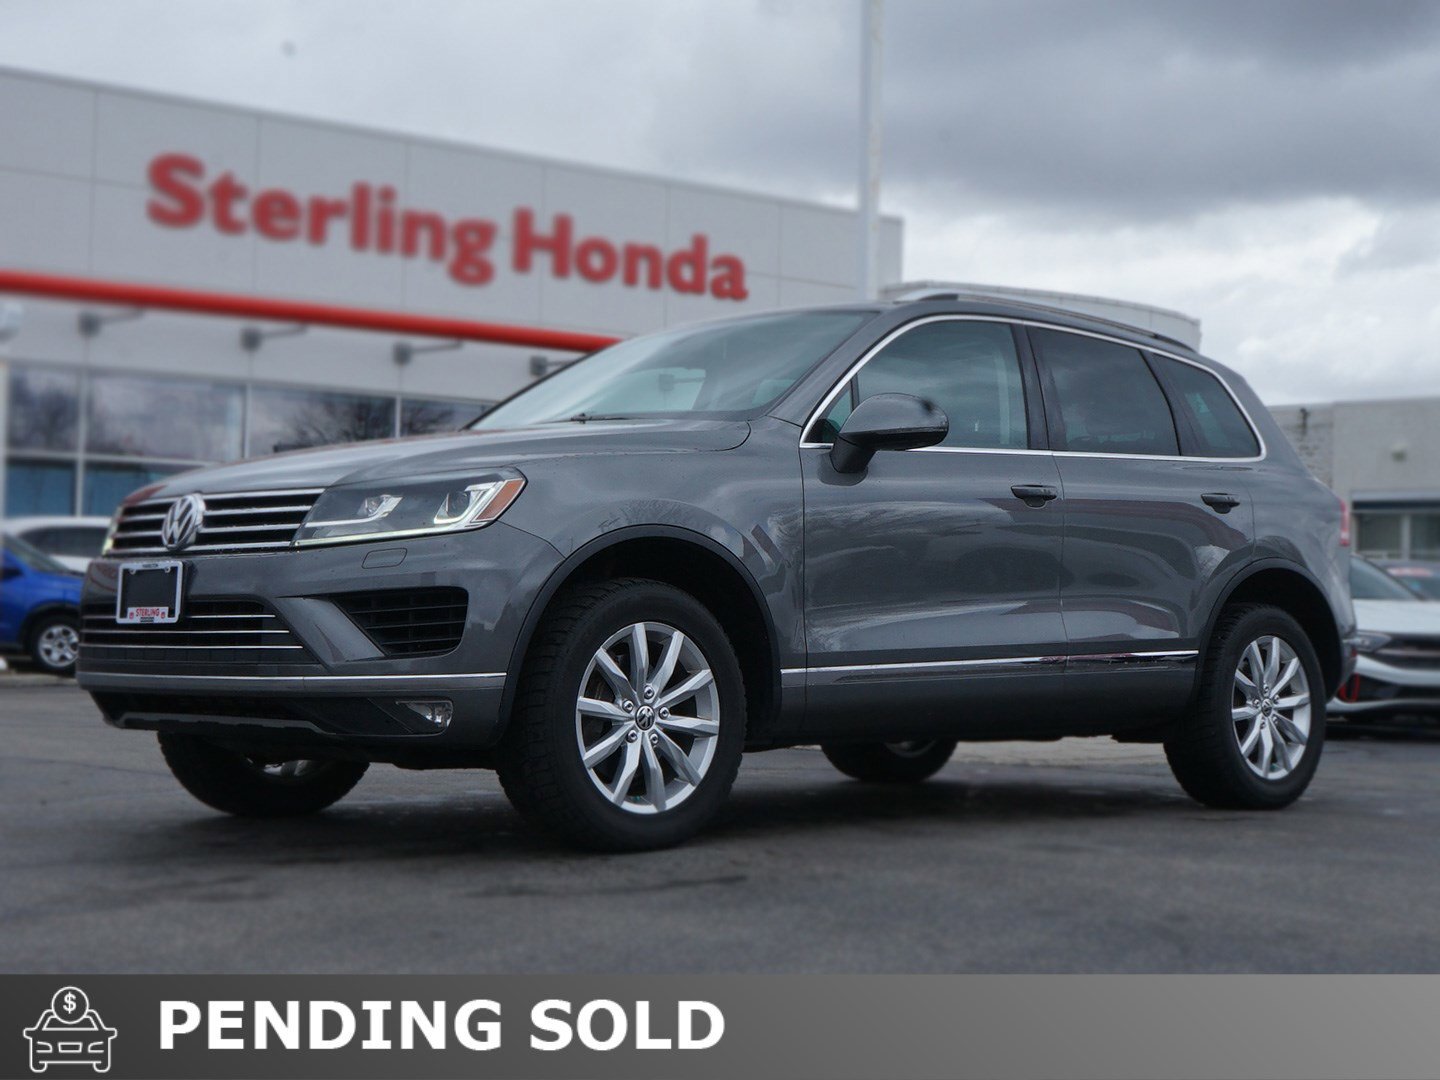 2016 Volkswagen Touareg SPORTLINE | AS-IS | NO ACCIDENTS | AWD